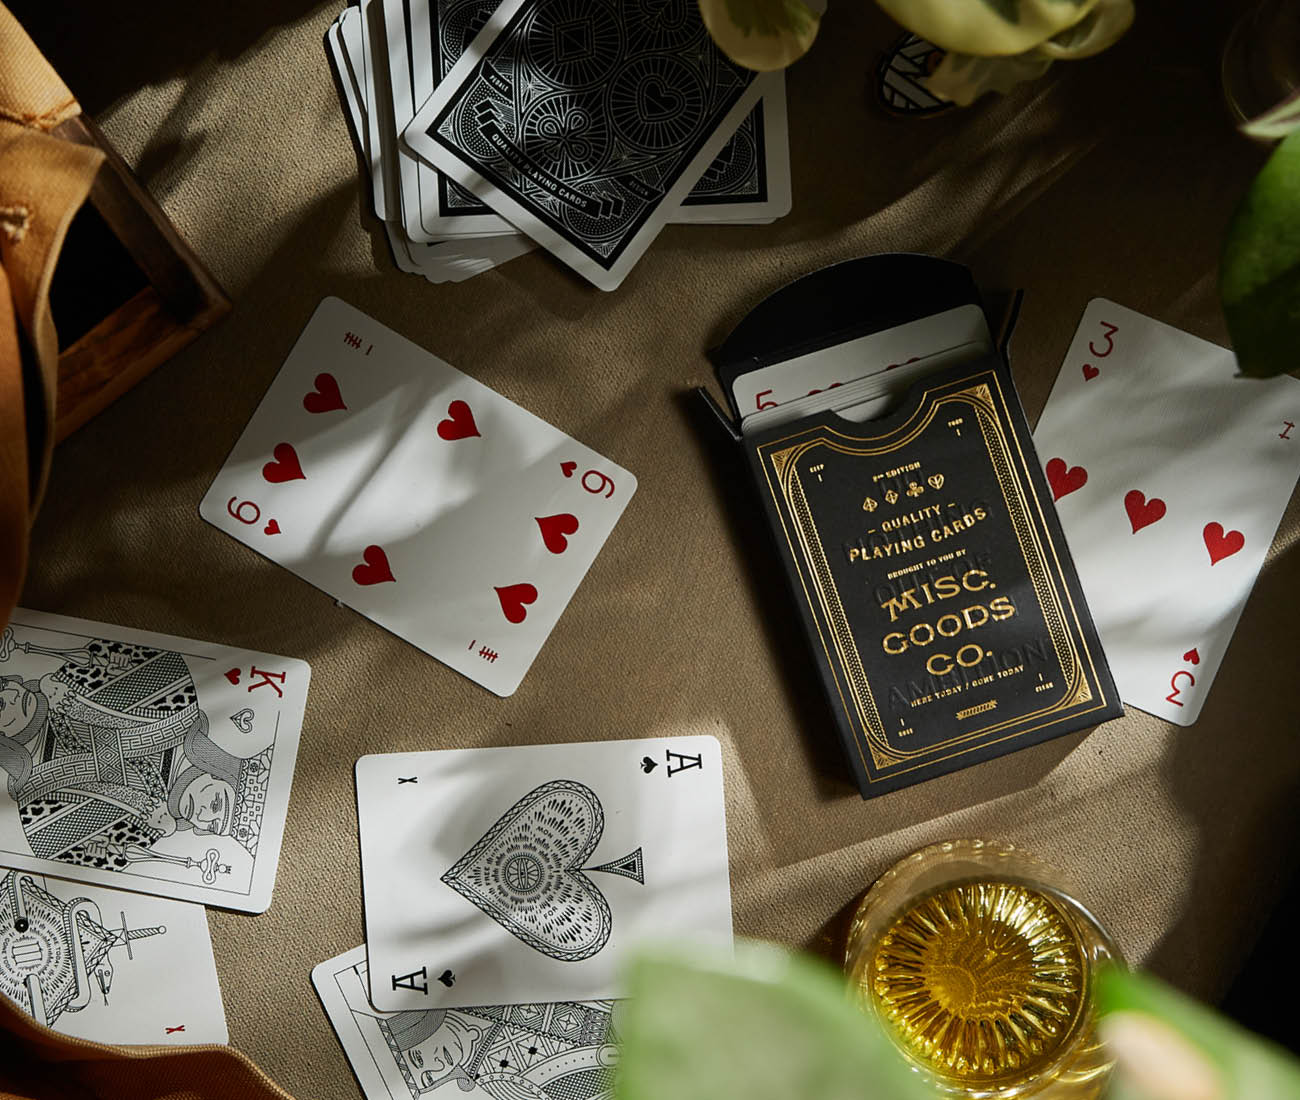 Playing Cards - Premium Grade, Made in USA – Misc. Goods Co.